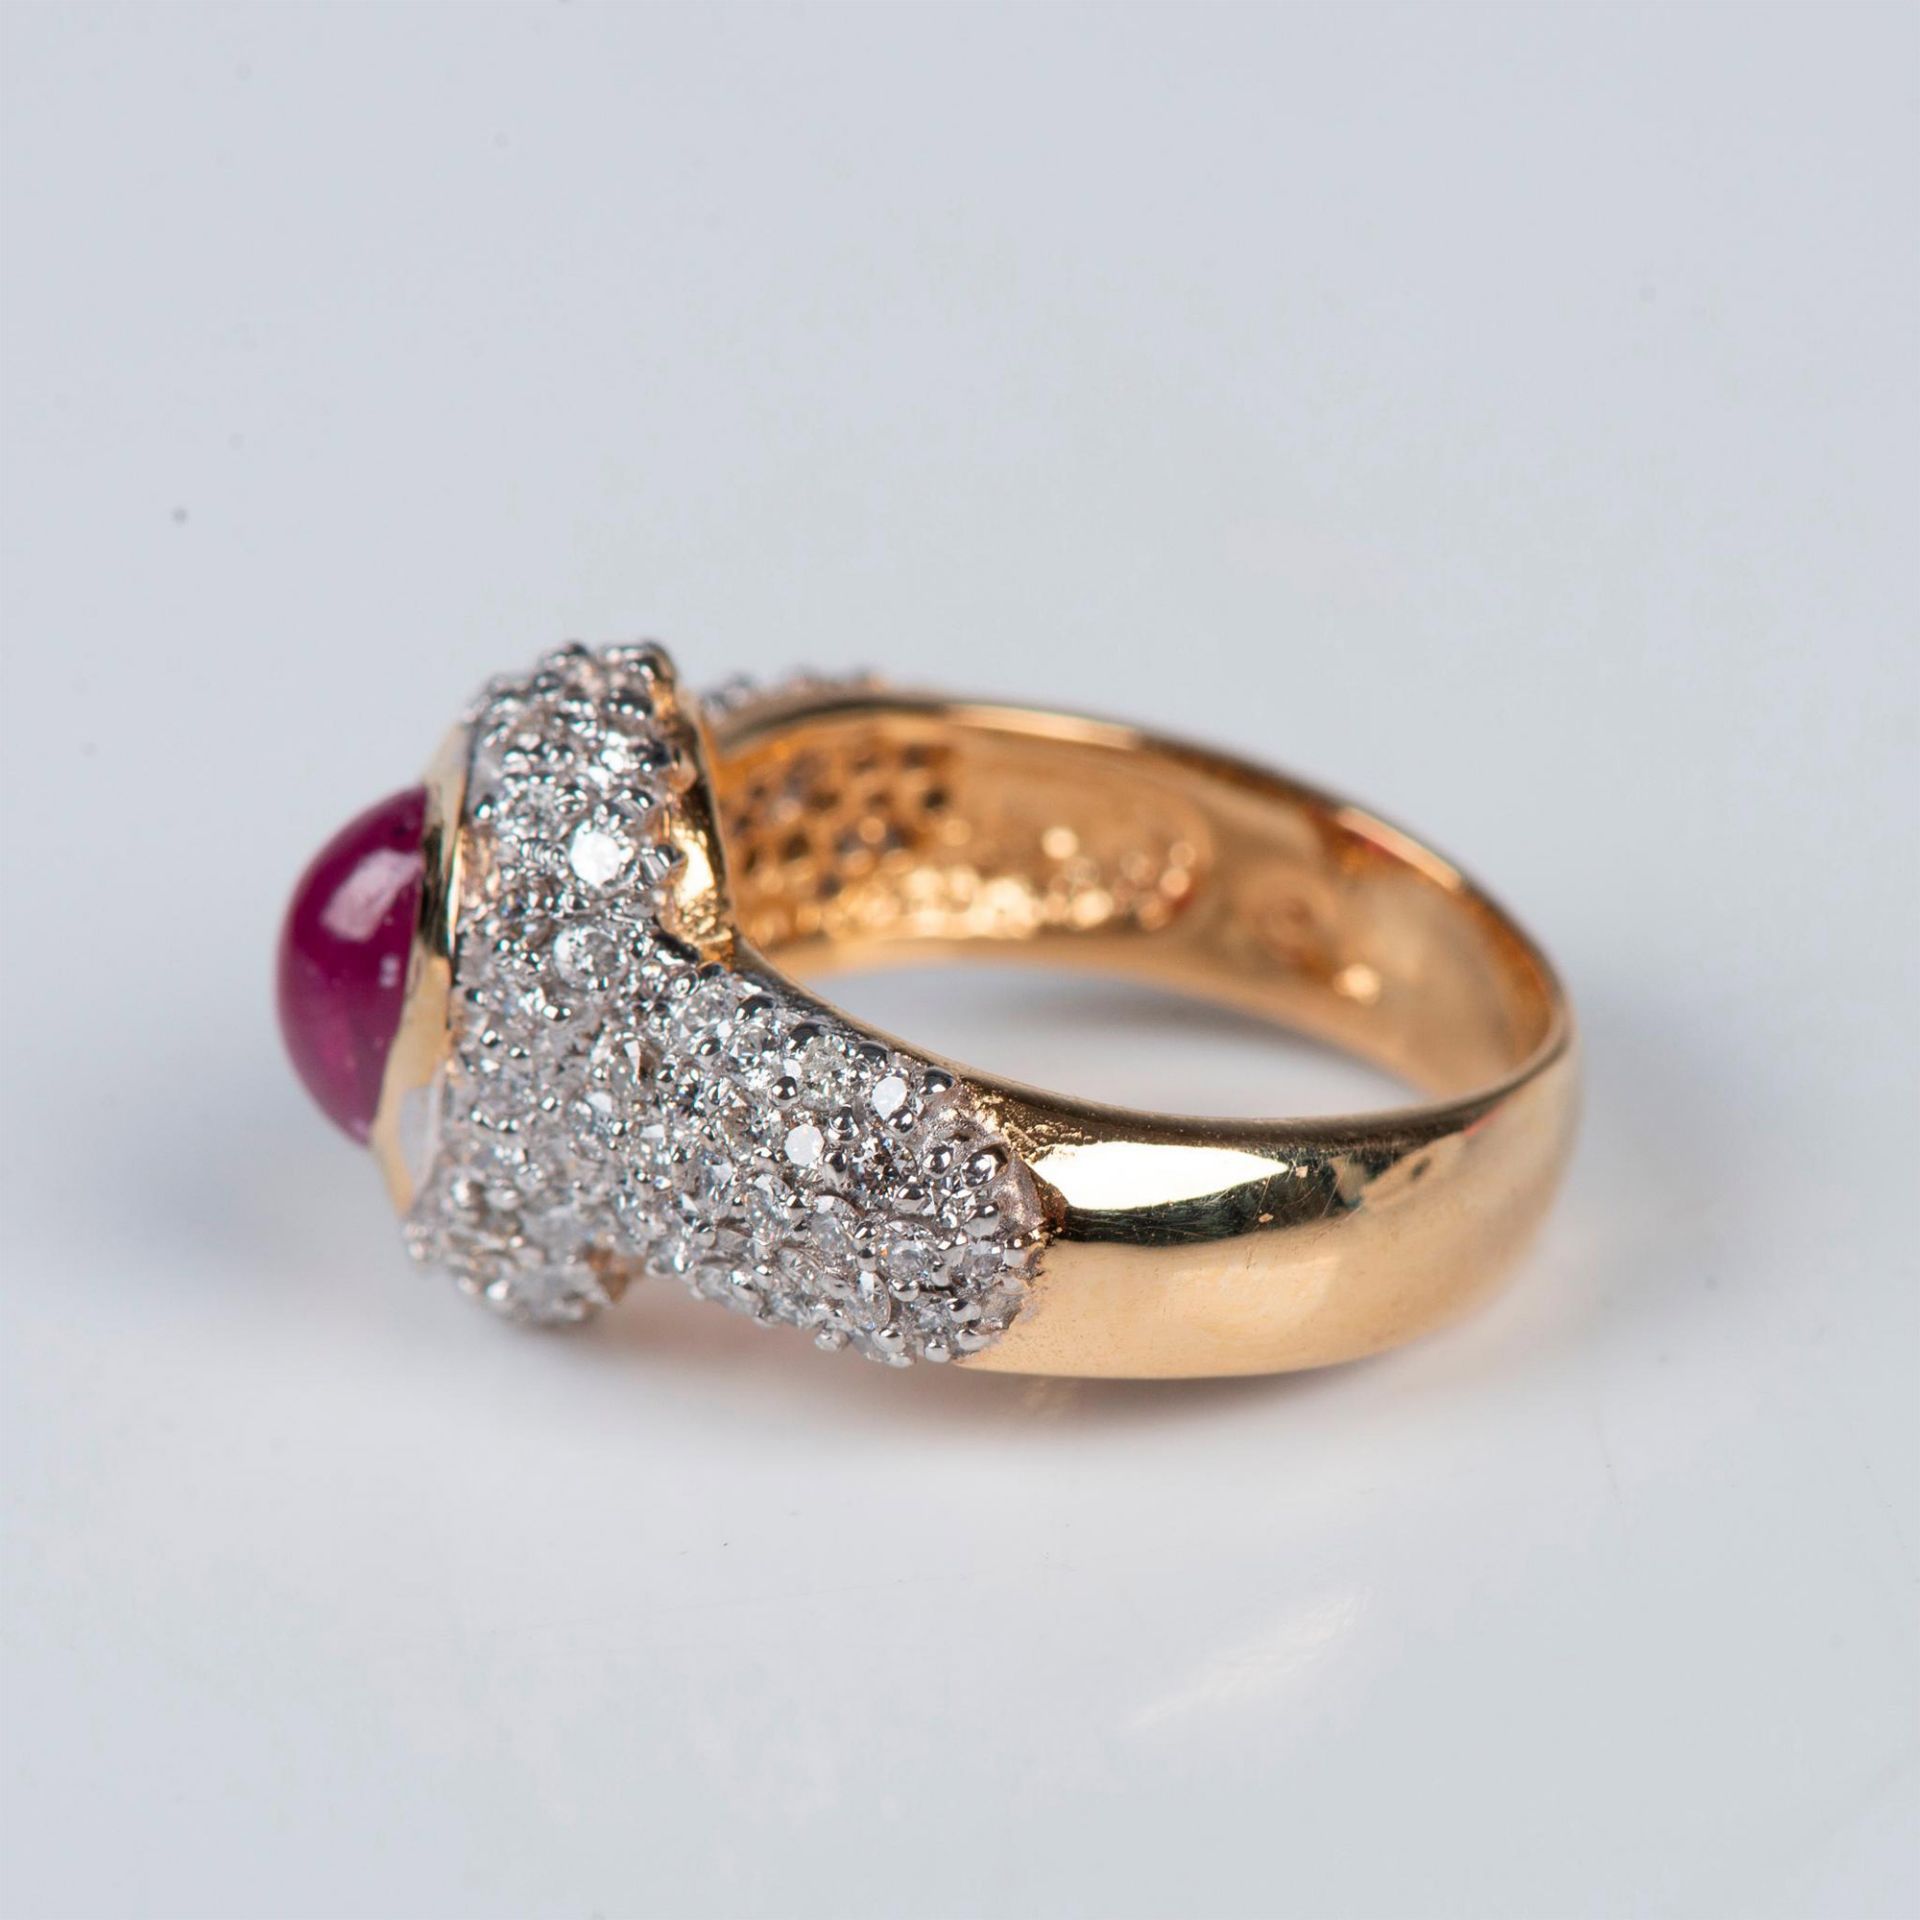 Fabulous 14K Yellow Gold, Diamond, and Ruby 2.9ctw Ring - Image 5 of 11